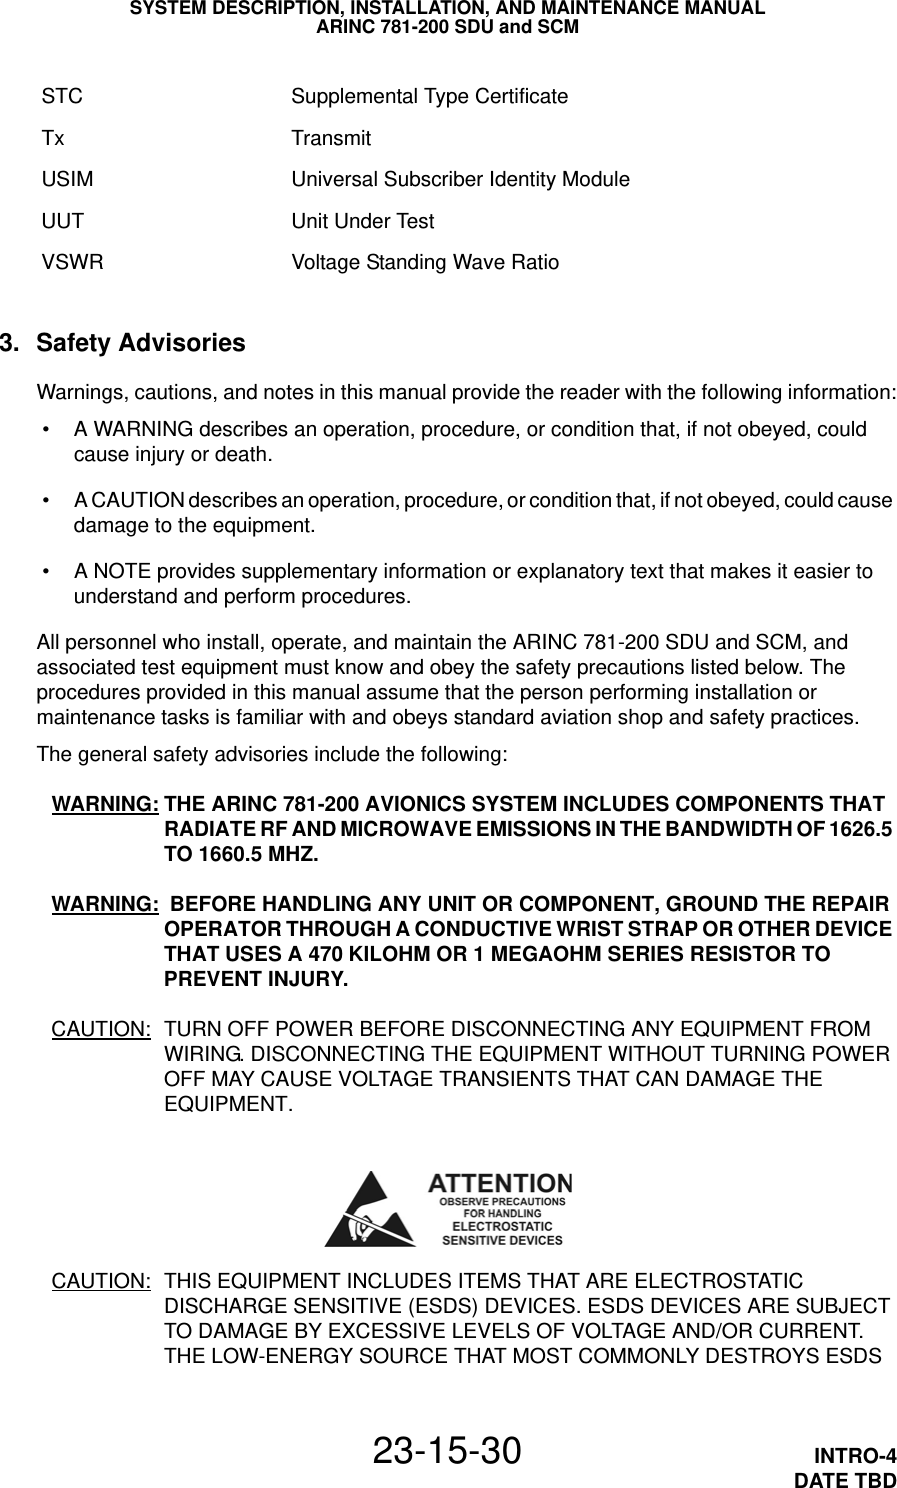 SYSTEM DESCRIPTION, INSTALLATION, AND MAINTENANCE MANUALARINC 781-200 SDU and SCM23-15-30 INTRO-4DATE TBD3. Safety AdvisoriesWarnings, cautions, and notes in this manual provide the reader with the following information: • A WARNING describes an operation, procedure, or condition that, if not obeyed, could cause injury or death. • A CAUTION describes an operation, procedure, or condition that, if not obeyed, could cause damage to the equipment. • A NOTE provides supplementary information or explanatory text that makes it easier to understand and perform procedures.All personnel who install, operate, and maintain the ARINC 781-200 SDU and SCM, and associated test equipment must know and obey the safety precautions listed below. The procedures provided in this manual assume that the person performing installation or maintenance tasks is familiar with and obeys standard aviation shop and safety practices.The general safety advisories include the following:WARNING: THE ARINC 781-200 AVIONICS SYSTEM INCLUDES COMPONENTS THAT RADIATE RF AND MICROWAVE EMISSIONS IN THE BANDWIDTH OF 1626.5 TO 1660.5 MHZ.WARNING:  BEFORE HANDLING ANY UNIT OR COMPONENT, GROUND THE REPAIR OPERATOR THROUGH A CONDUCTIVE WRIST STRAP OR OTHER DEVICE THAT USES A 470KILOHM OR 1 MEGAOHM SERIES RESISTOR TO PREVENT INJURY.CAUTION: TURN OFF POWER BEFORE DISCONNECTING ANY EQUIPMENT FROM WIRING. DISCONNECTING THE EQUIPMENT WITHOUT TURNING POWER OFF MAY CAUSE VOLTAGE TRANSIENTS THAT CAN DAMAGE THE EQUIPMENT.CAUTION: THIS EQUIPMENT INCLUDES ITEMS THAT ARE ELECTROSTATIC DISCHARGE SENSITIVE (ESDS) DEVICES. ESDS DEVICES ARE SUBJECT TO DAMAGE BY EXCESSIVE LEVELS OF VOLTAGE AND/OR CURRENT. THE LOW-ENERGY SOURCE THAT MOST COMMONLY DESTROYS ESDS STC Supplemental Type CertificateTx TransmitUSIM Universal Subscriber Identity ModuleUUT Unit Under TestVSWR Voltage Standing Wave Ratio